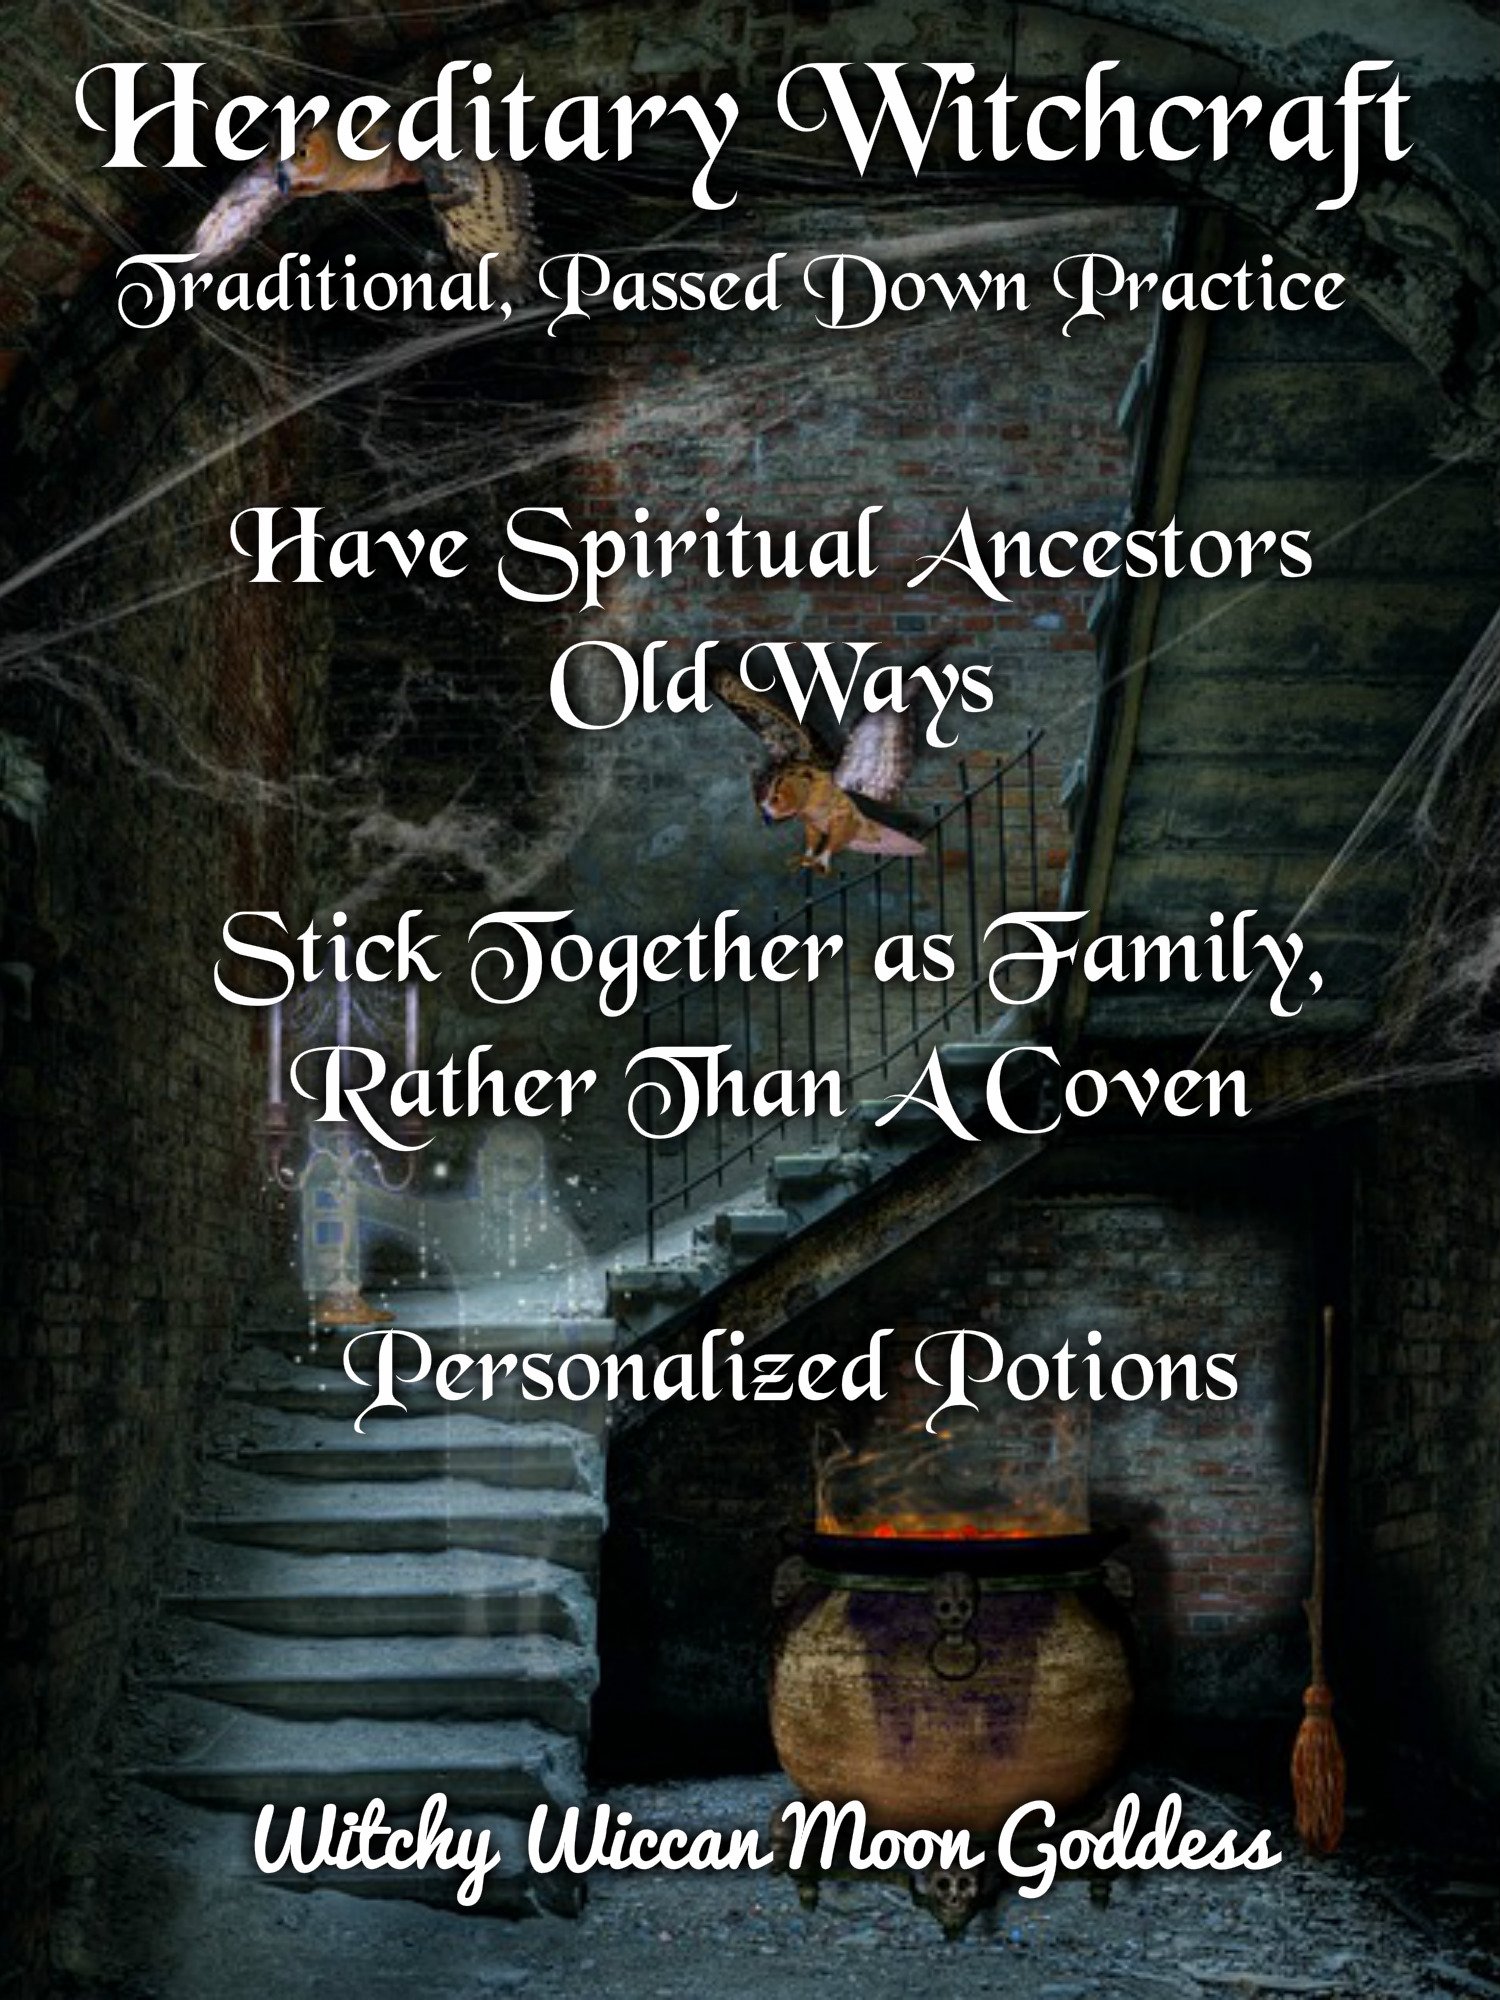 Hereditary Witchcraft: Traditional passed down practice. Old ways. Have spiritual ancestors. Stick together as family rather than a coven. Personalized Potions.